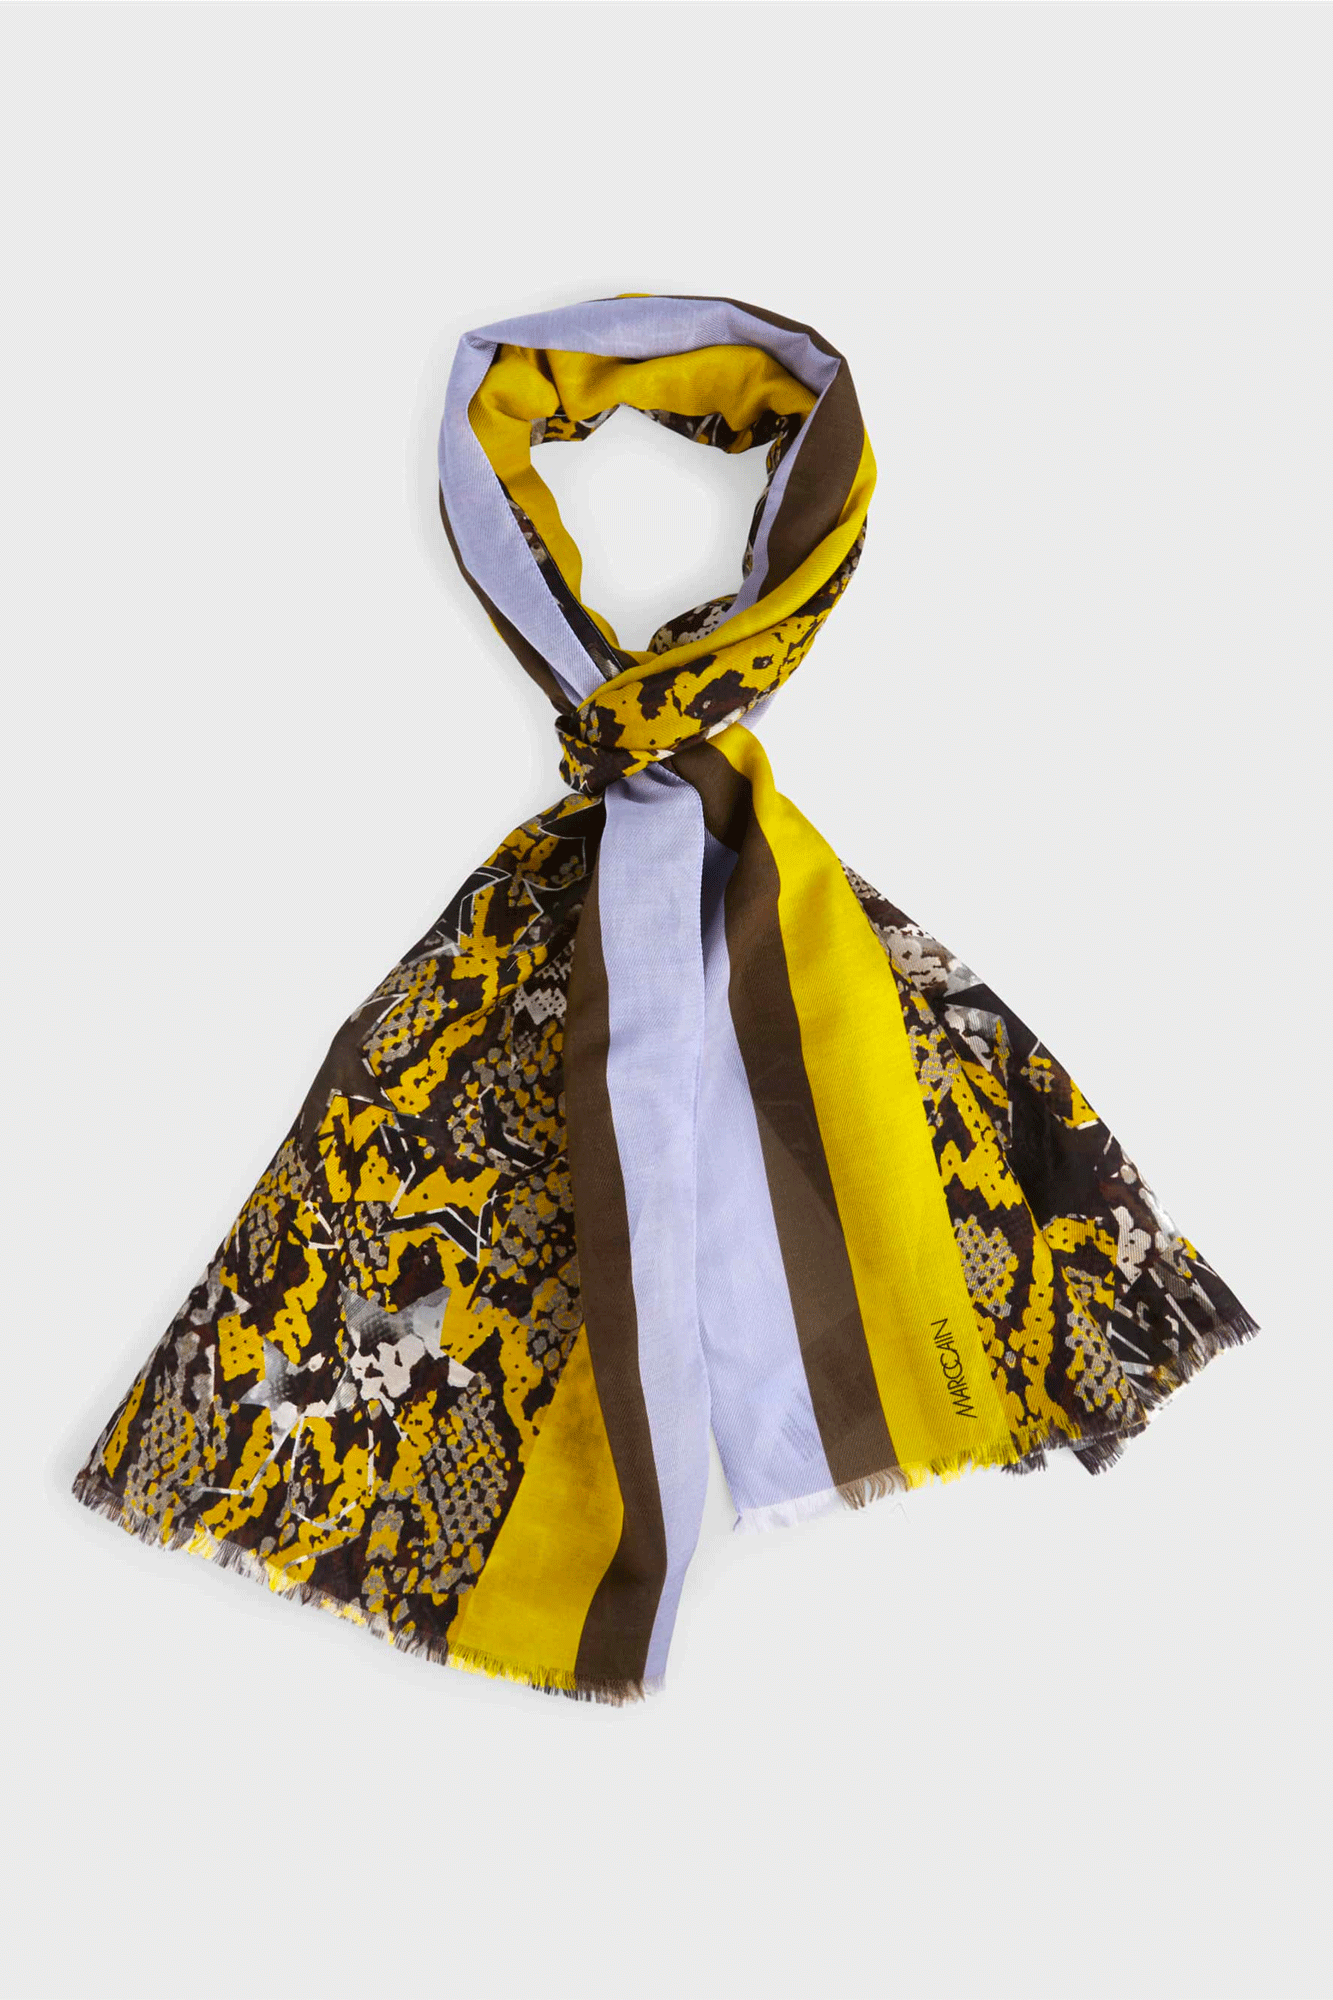 The Snaky Stars Scarf from Marc Cain combines the luxury of cotton and silk with a stylish mix of stripes, stars, and croc design. The exquisite crafting and fine fringes on the ends will make it a timeless accessory for any wardrobe.